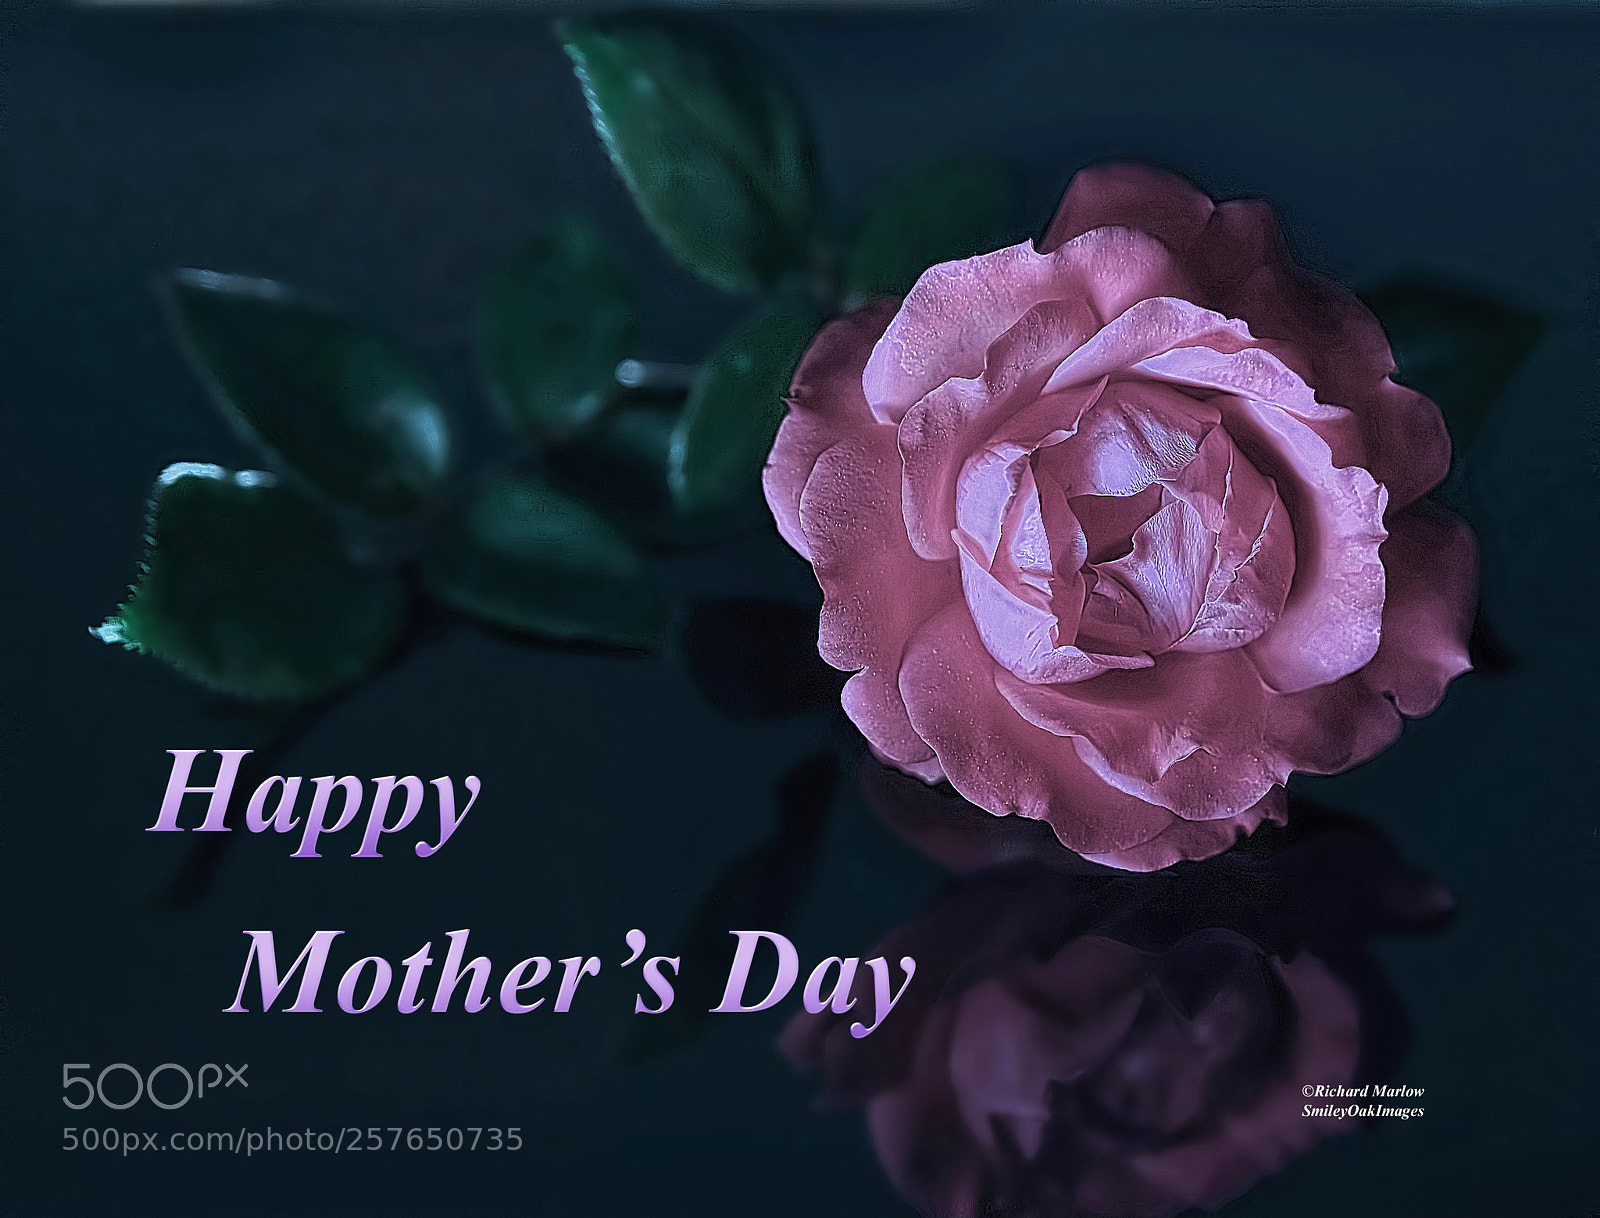 Nikon D5000 sample photo. Happy mothers day photography